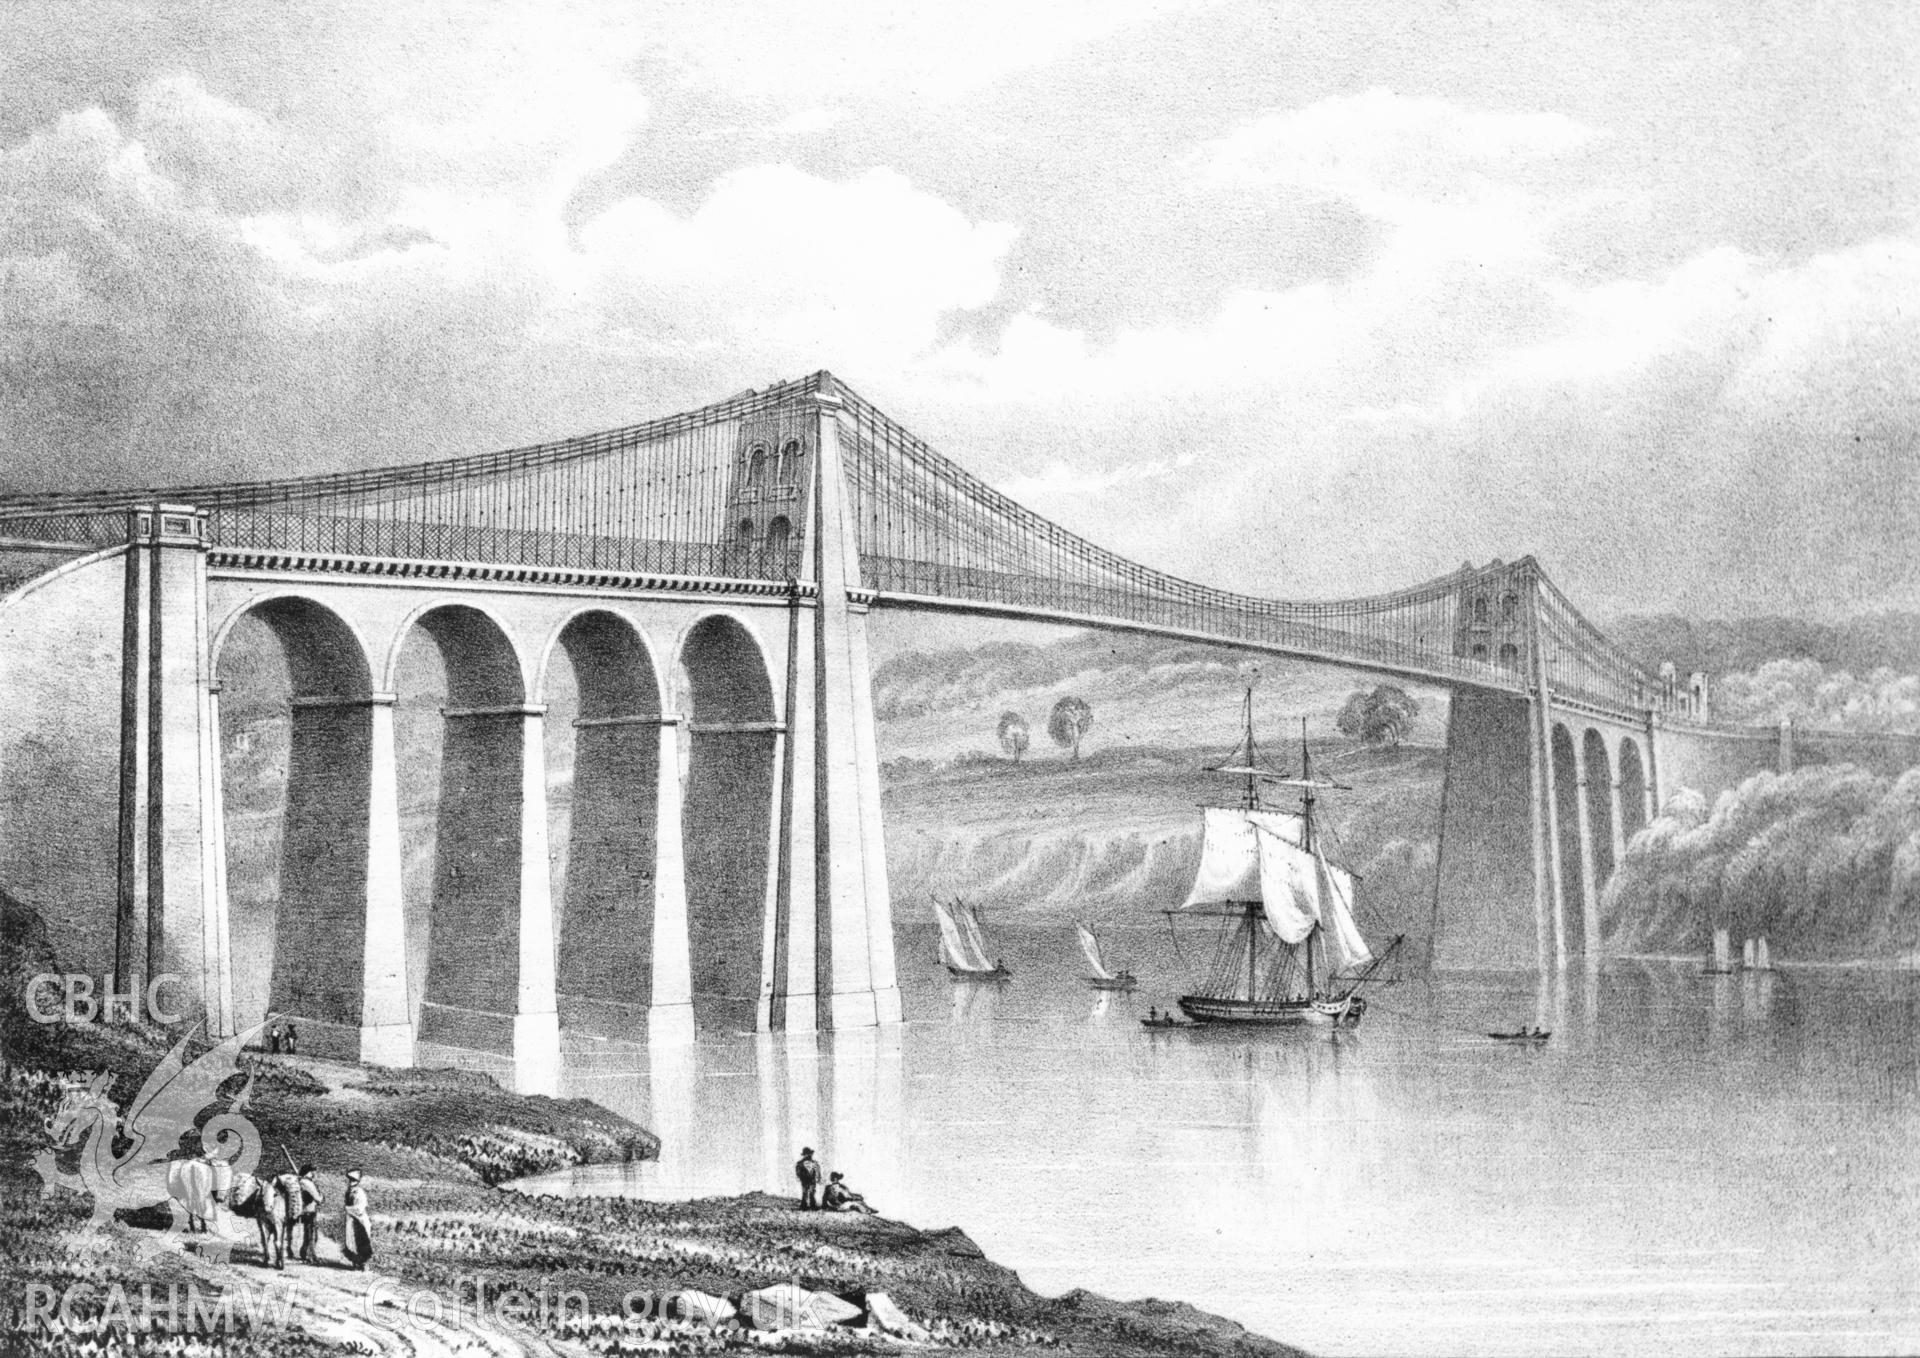 1 b/w print of 19th century engraving showing  Menai suspension bridge with ships and figures, collated by the former Central Office of Information.